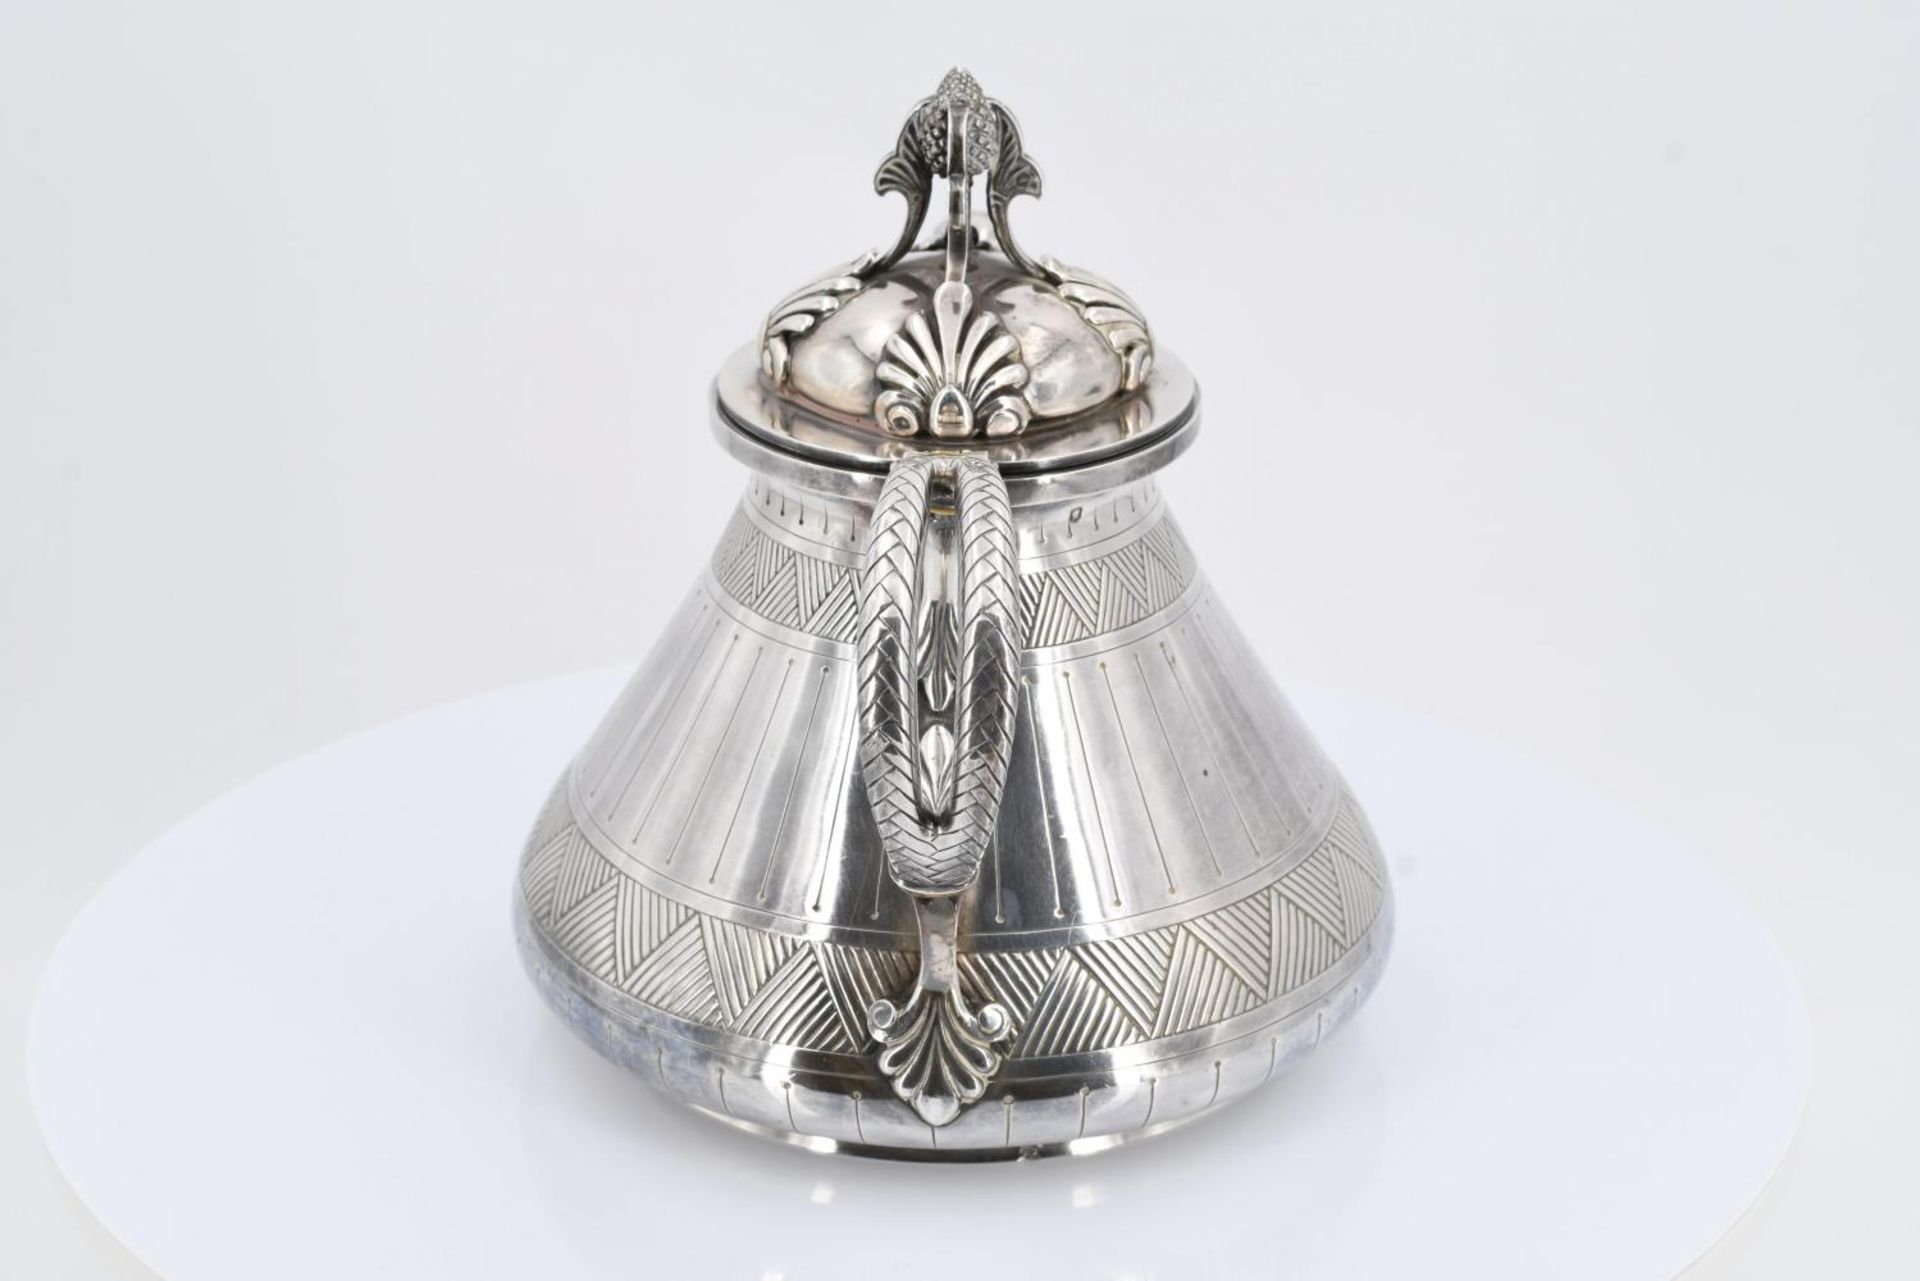 Émile Froment-Meurice: SILVER COFFEE AND TEA SERVICE IN ORIENTAL STYLE - Image 15 of 25